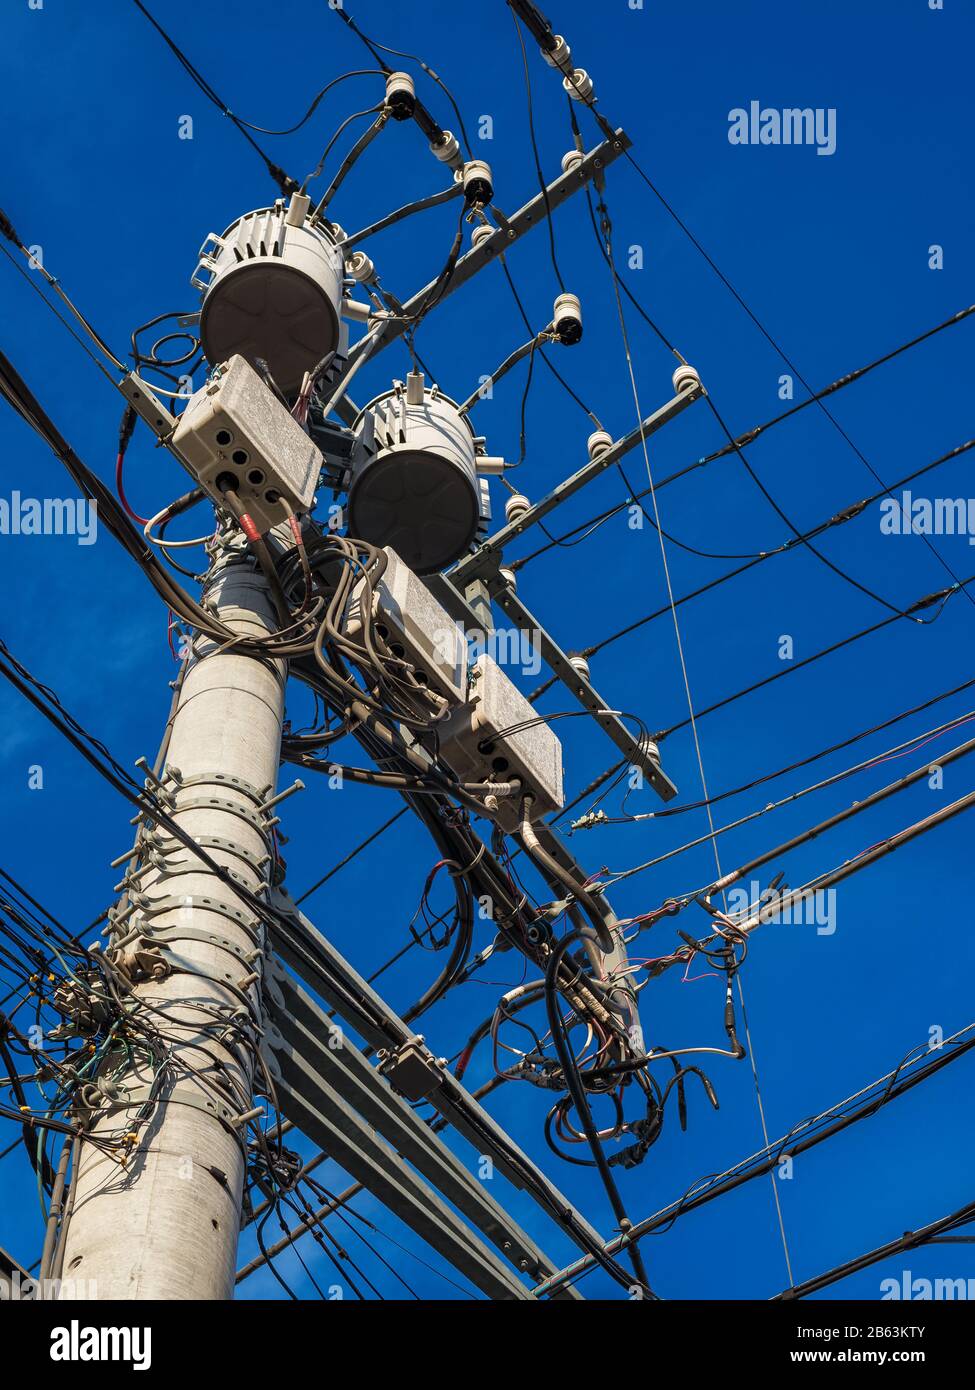 Electric power industry. Characteristic utility and transmission pole and overhead power lines in Japan Stock Photo